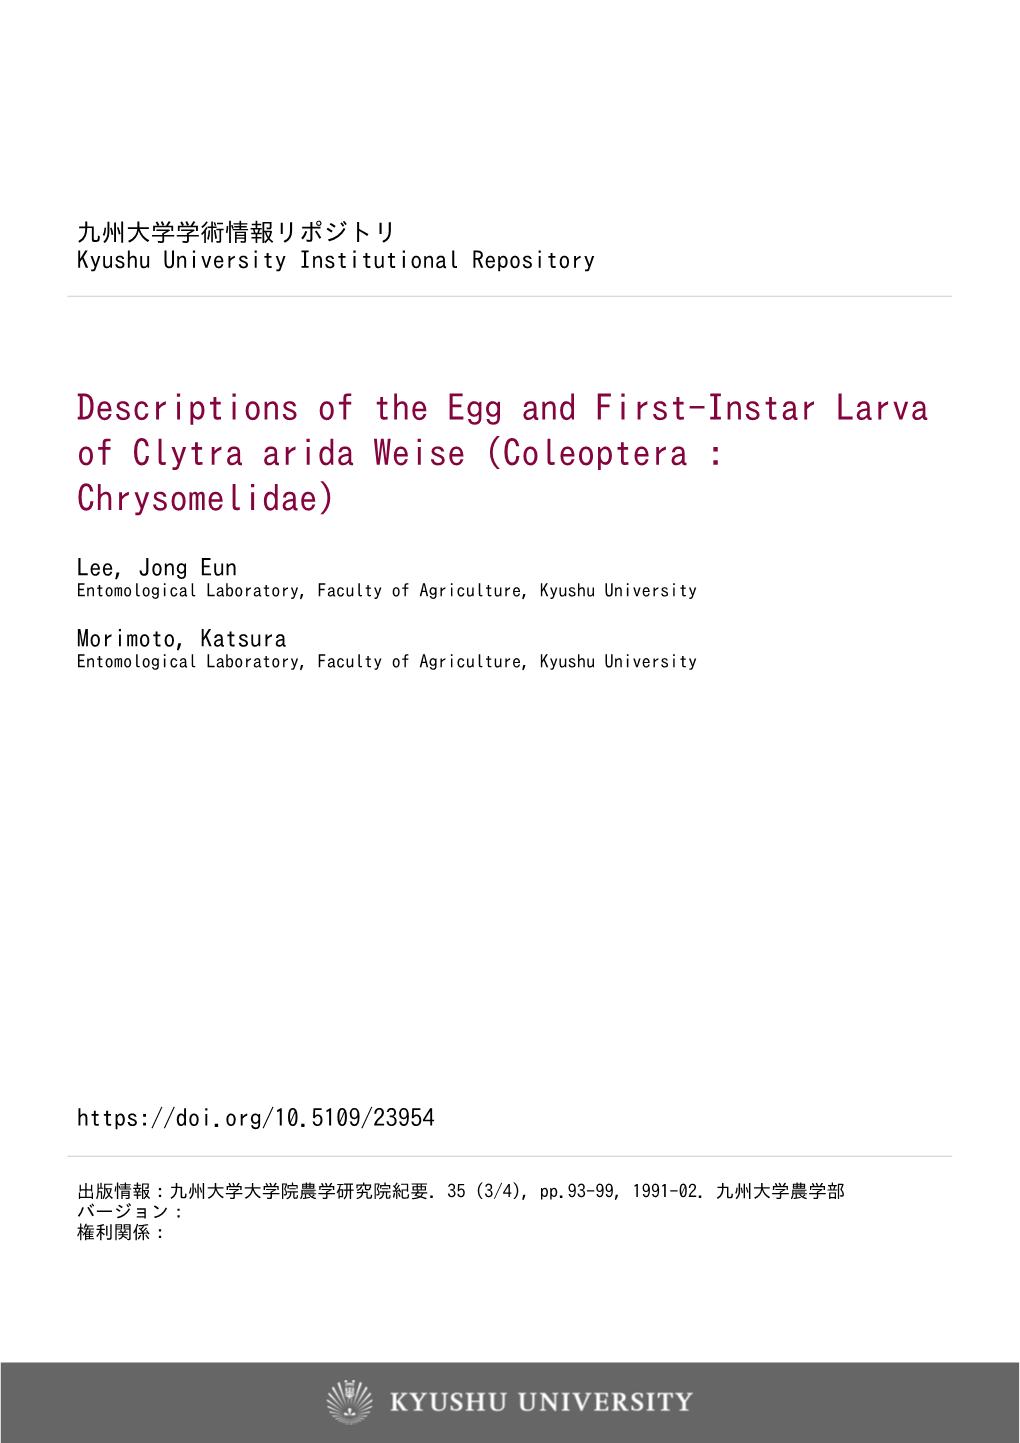 Descriptions of the Egg and First-Instar Larva of Clytra Arida Weise (Coleoptera : Chrysomelidae)